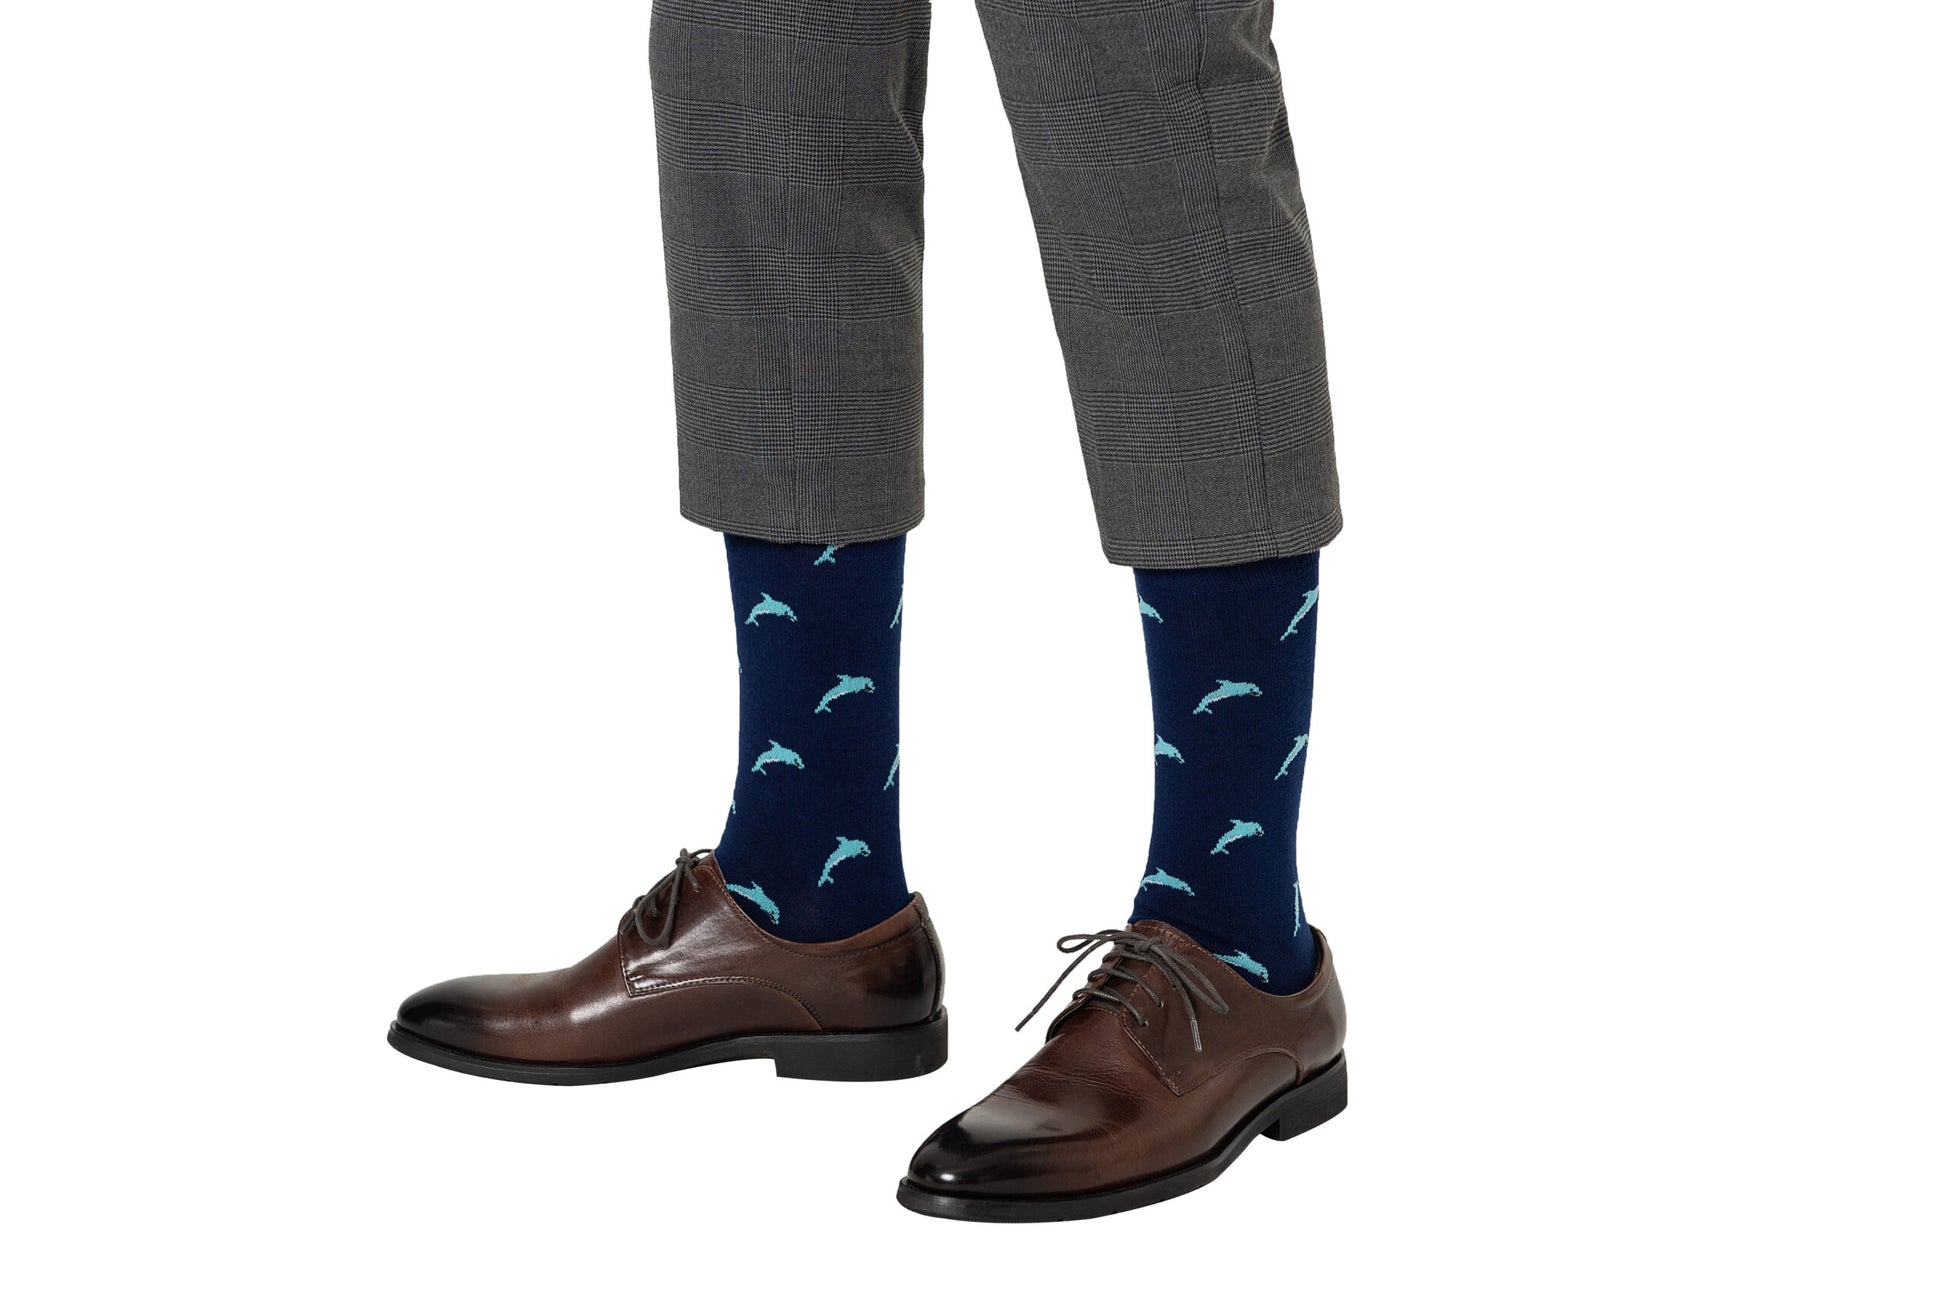 A man wearing a pair of Dolphin Socks.